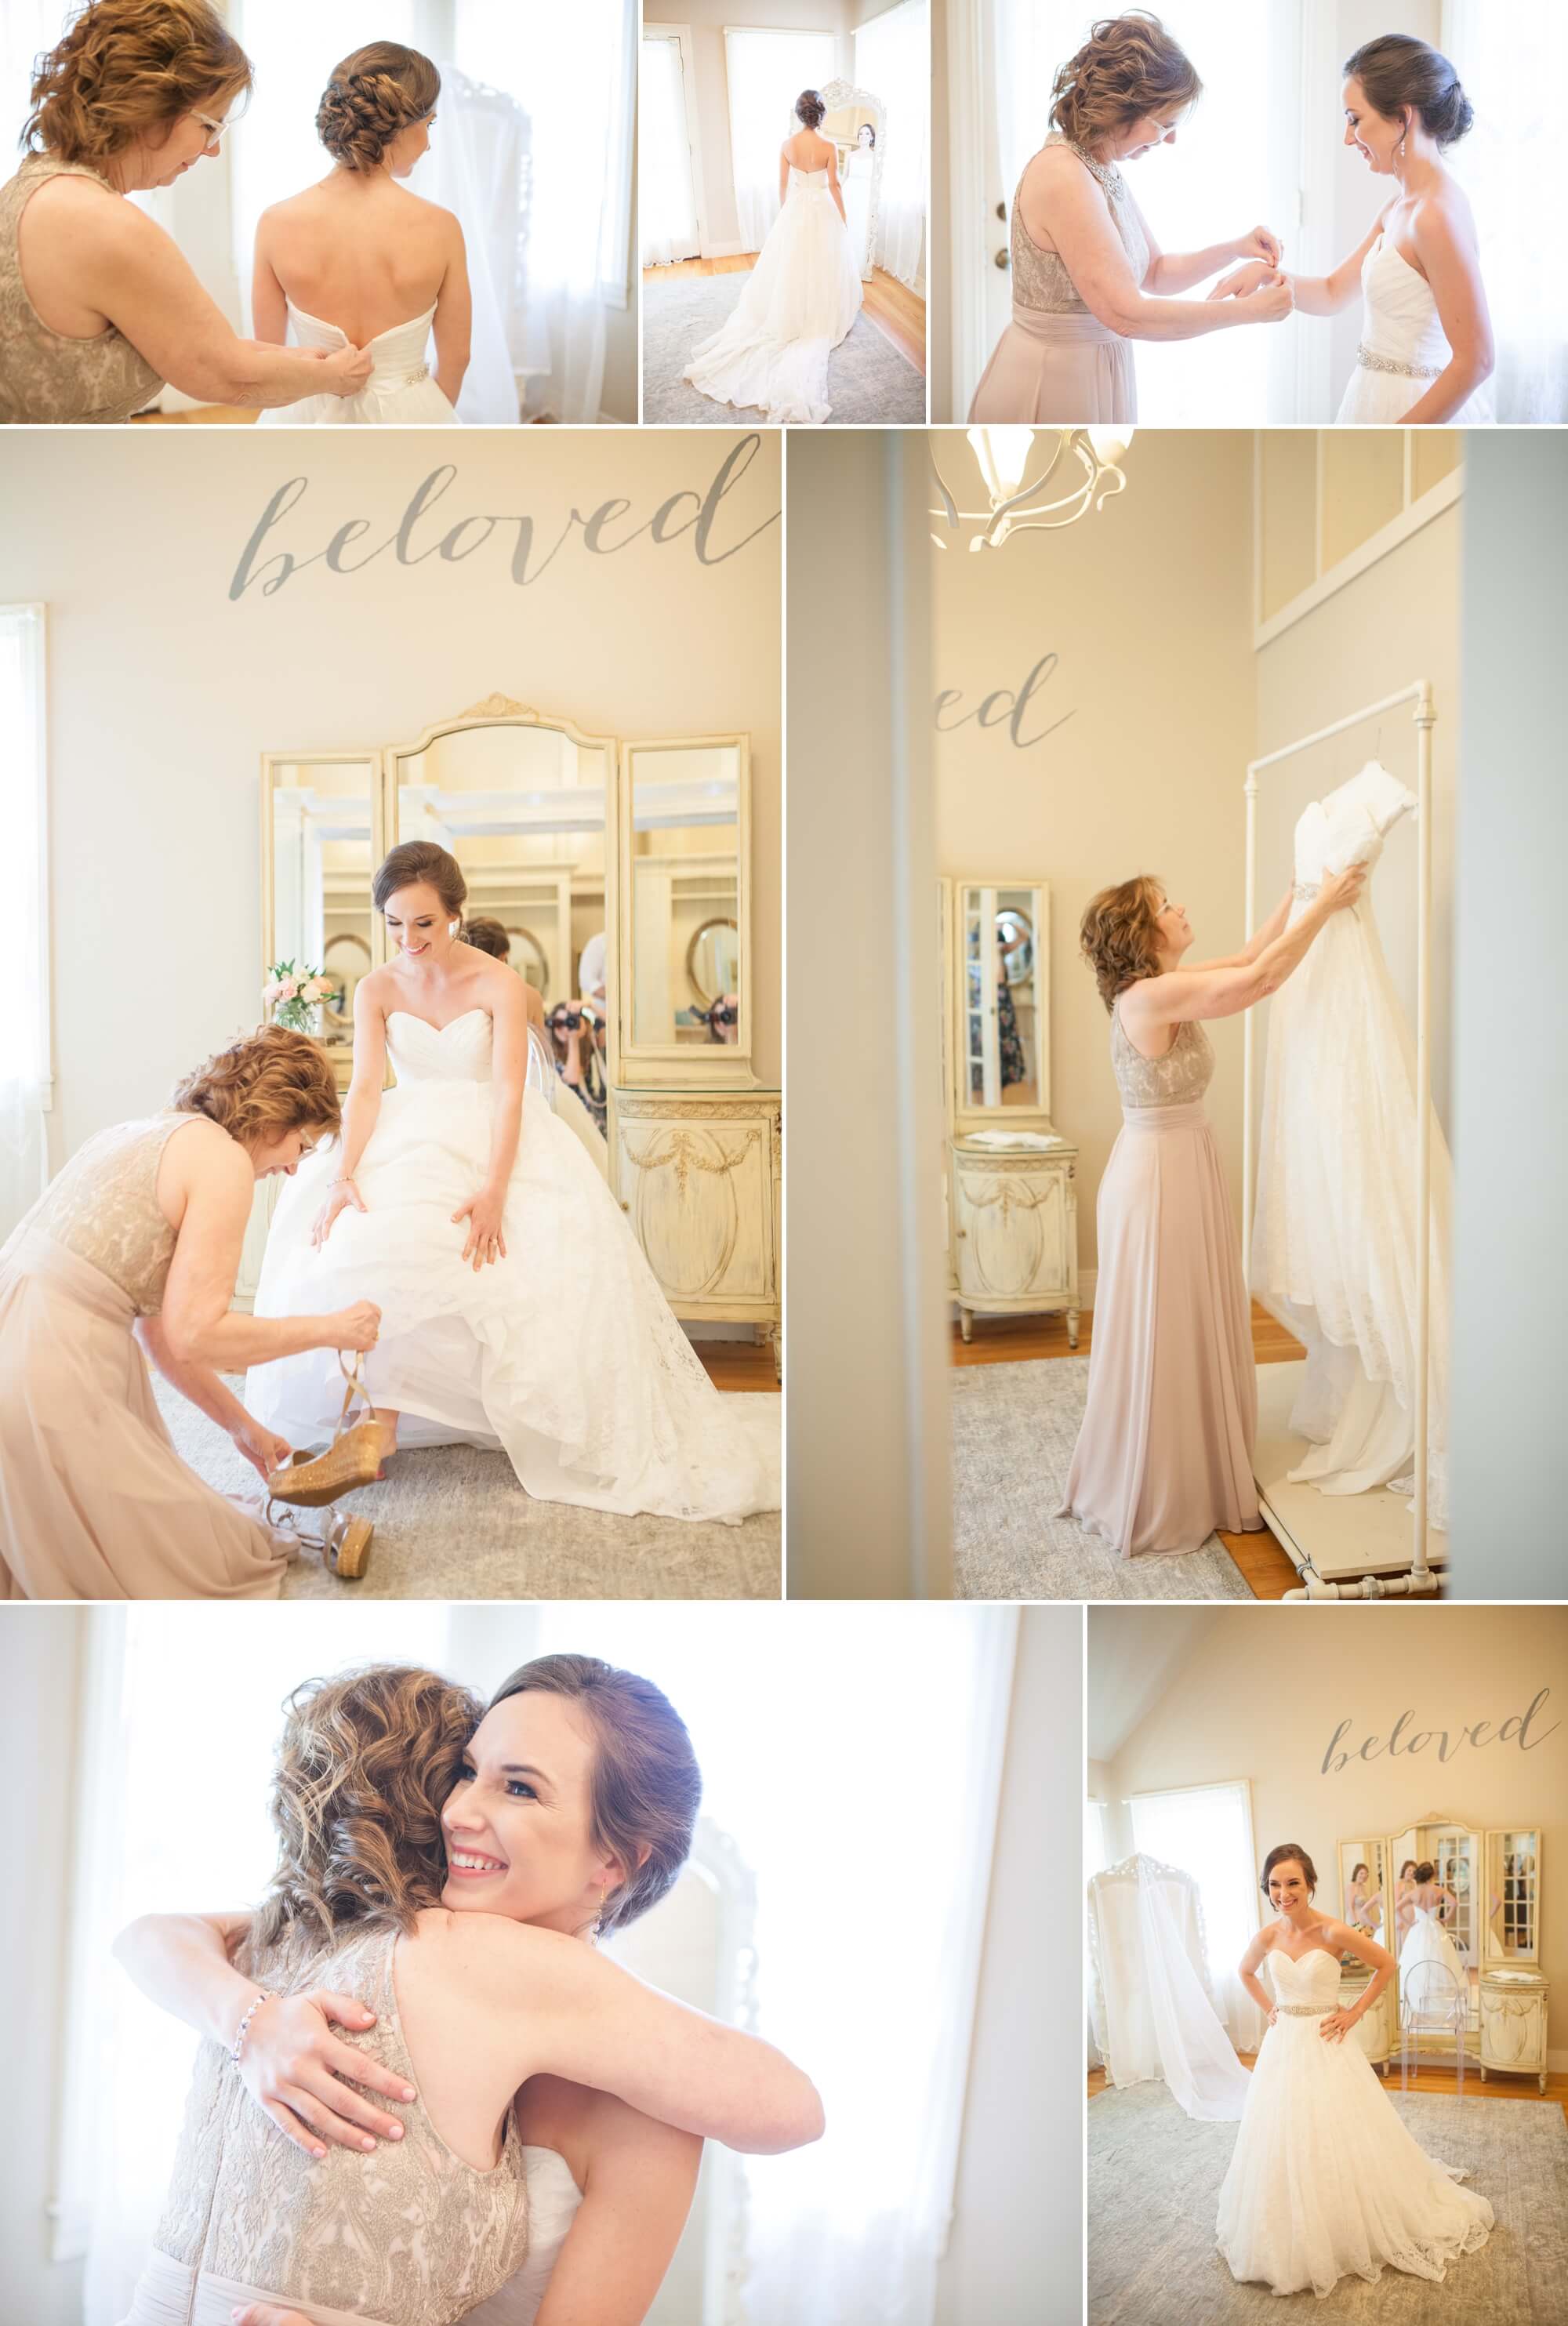 Mom and daughter getting dressed. Spring wedding at Cedarwood Weddings in Nashville, TN. Photo by Krista Lee Photography, from Sam and Izzy's wedding day.